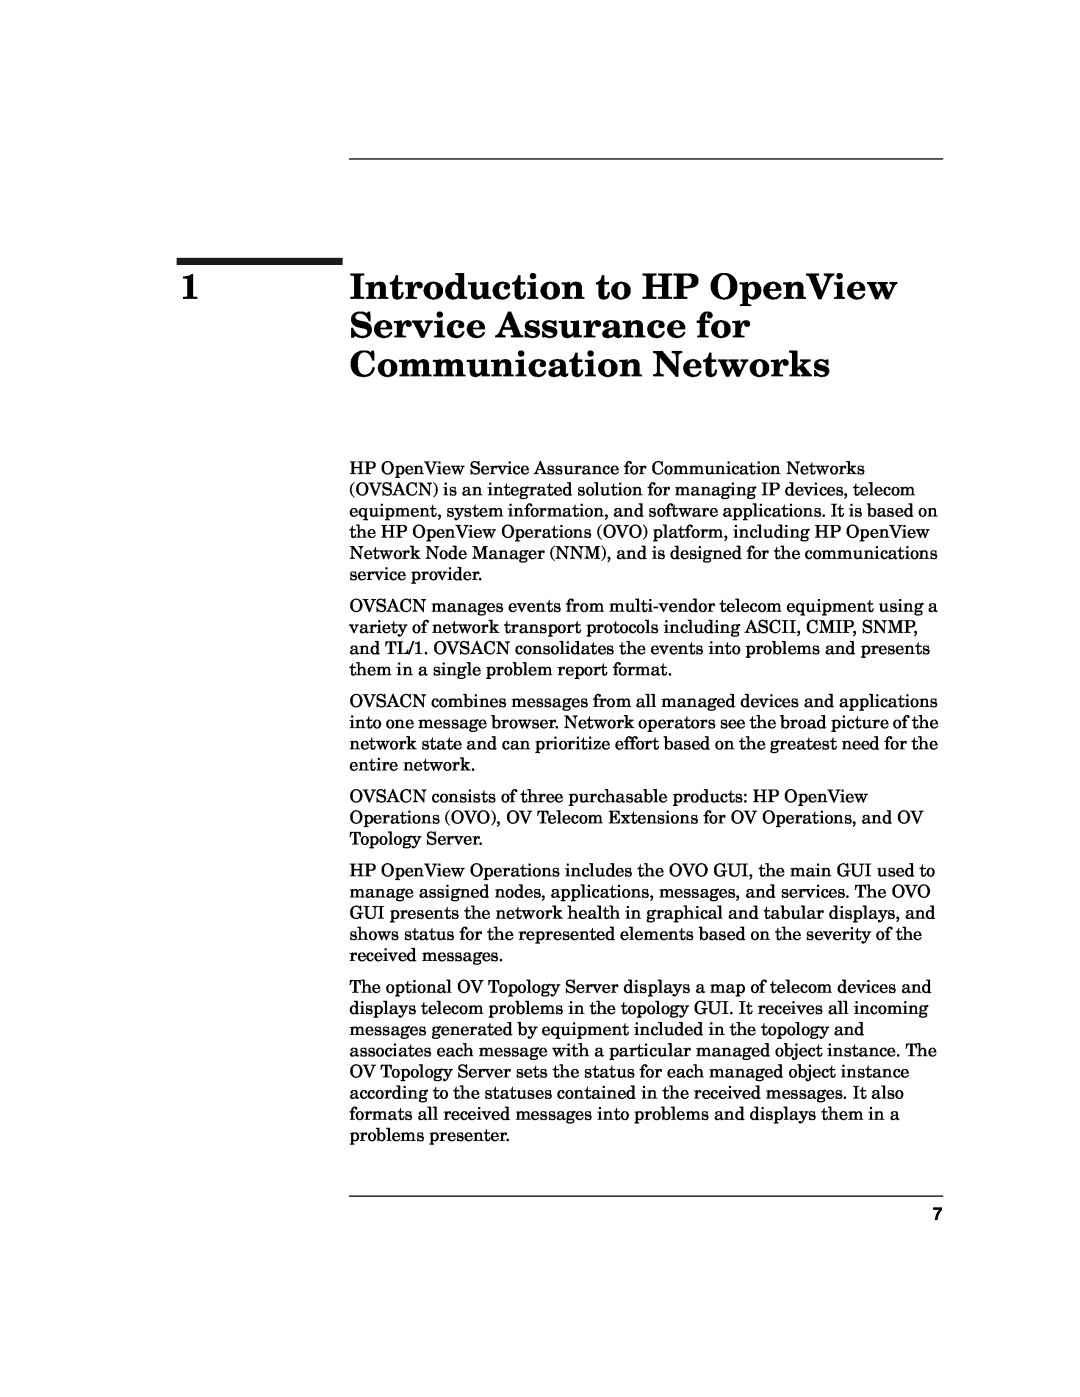 HP OPENVIEW J5119-90007 manual Introduction to HP OpenView, Service Assurance for, Communication Networks 